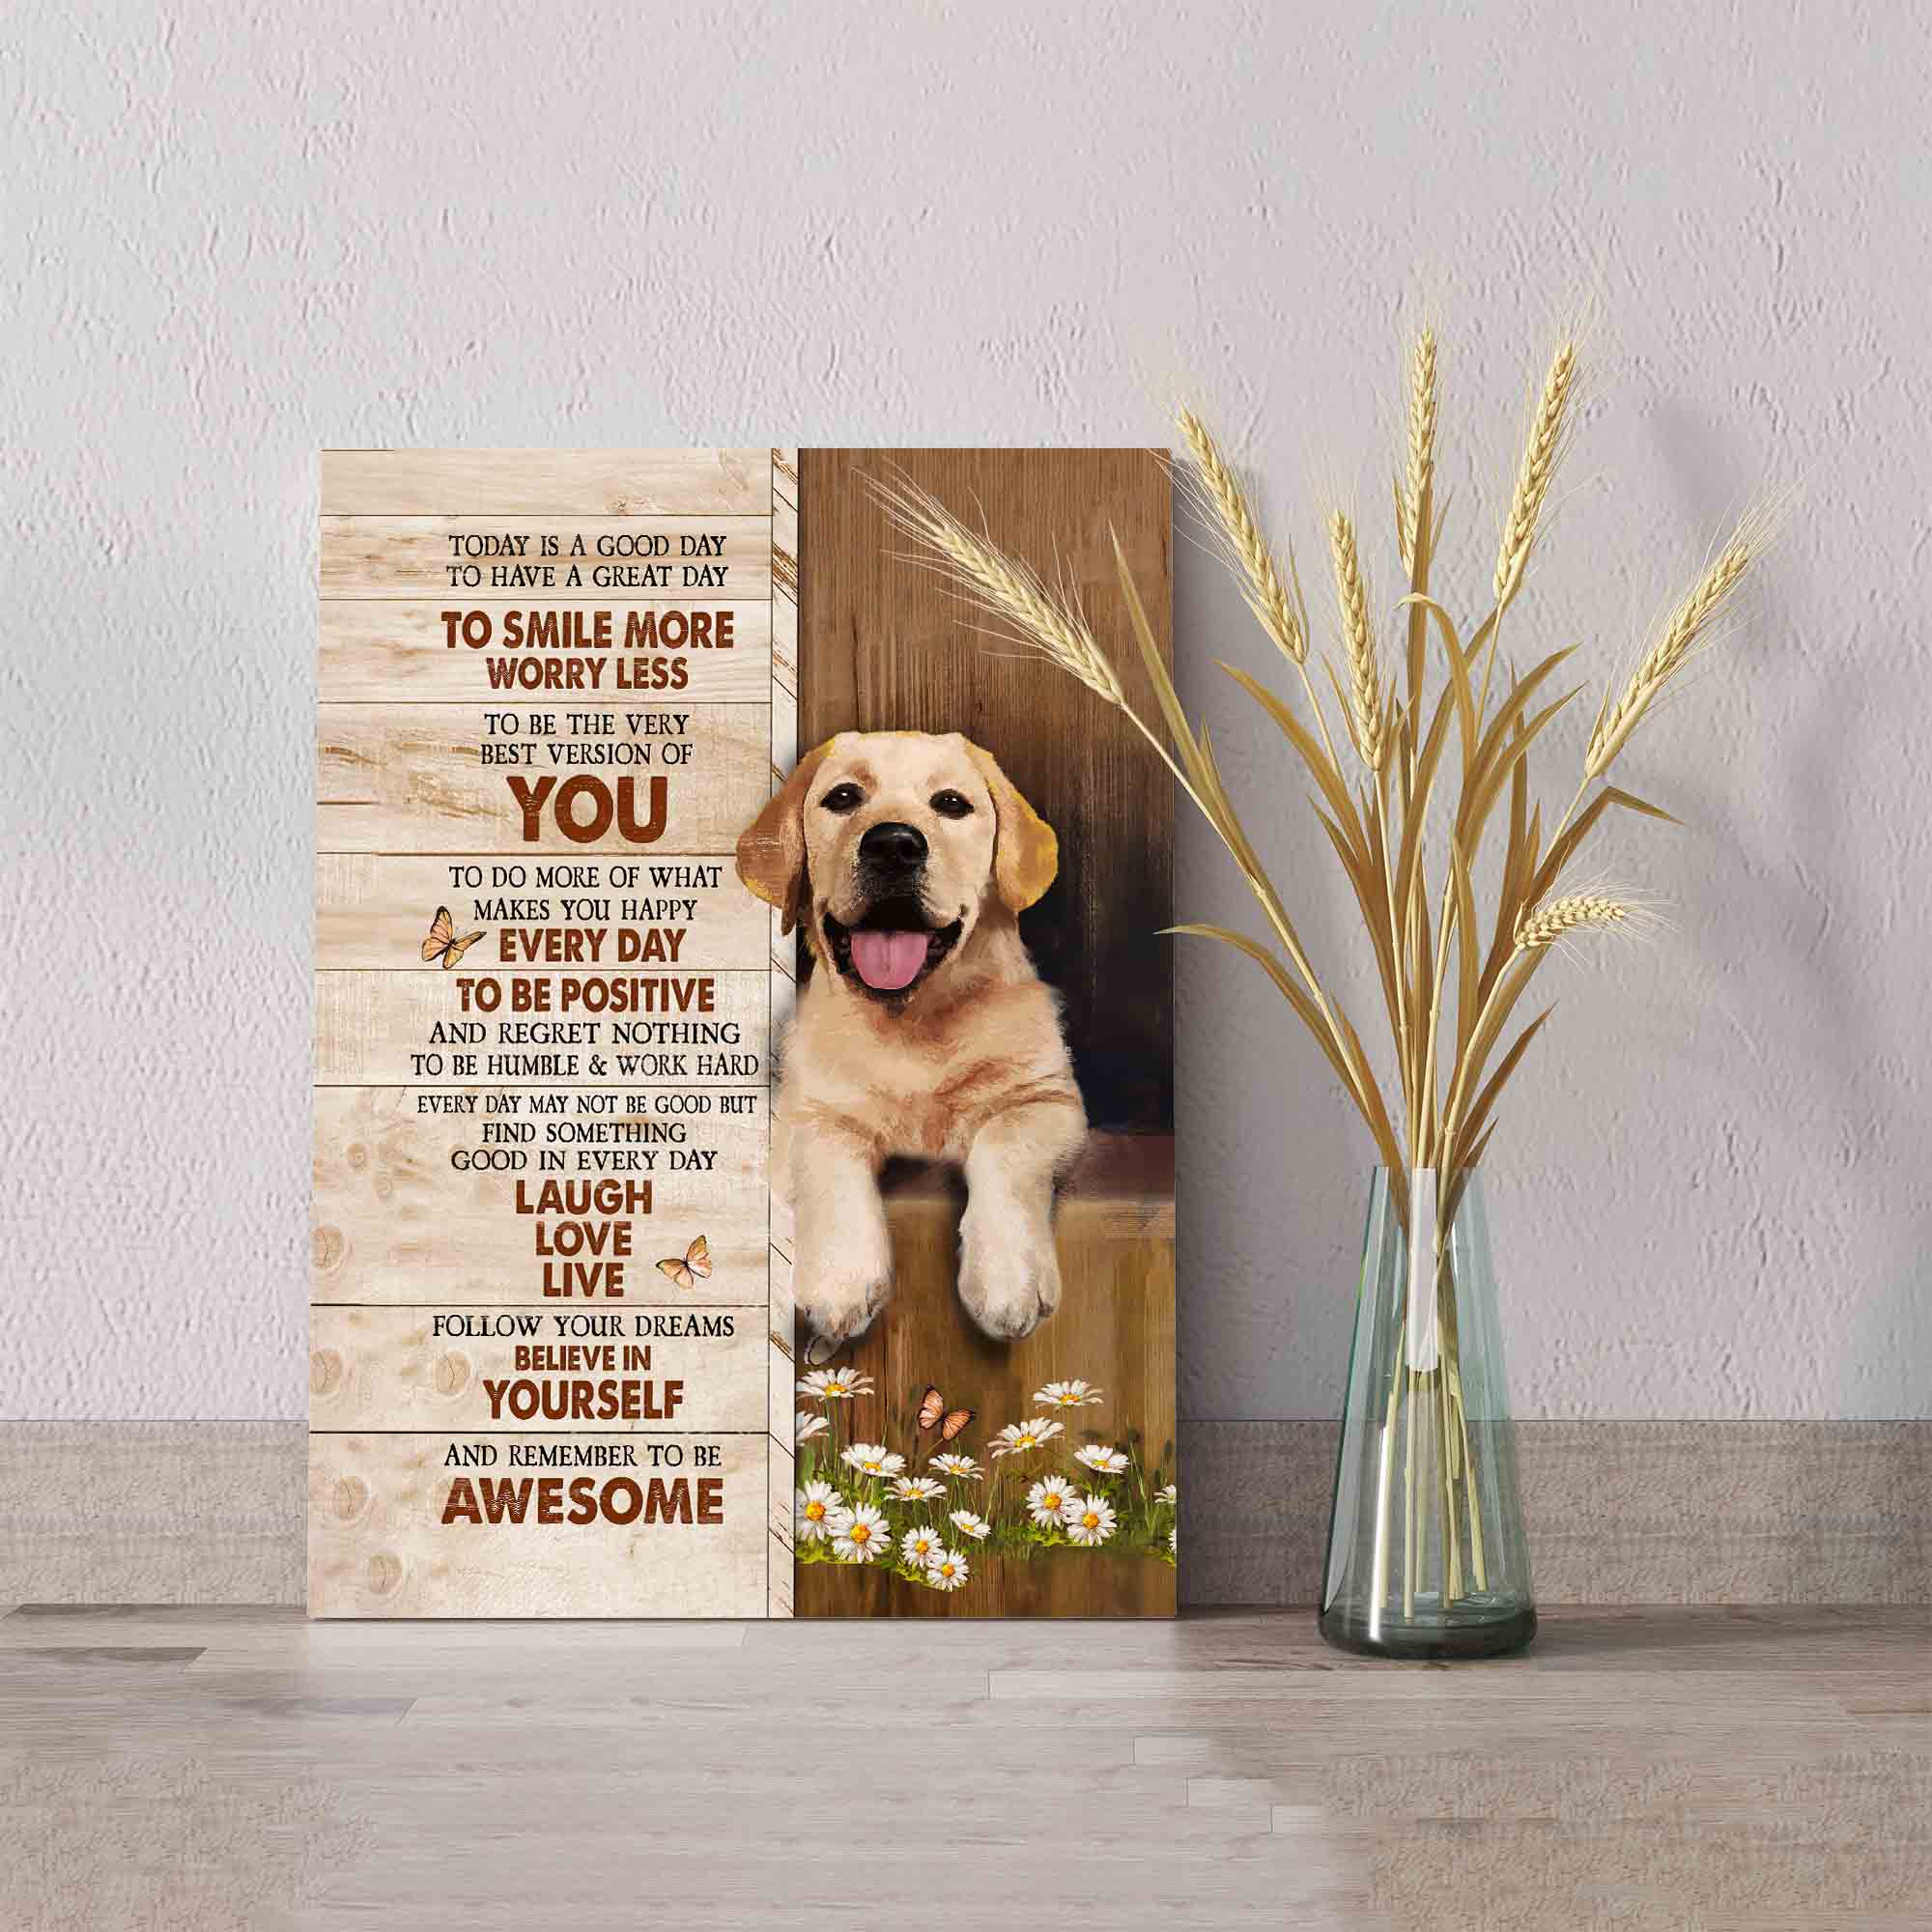 Today Is A Good Day To Have A Great Day Canvas, Dog Canvas, Daisy Canvas, Butterfly Canvas, Gift Canvas